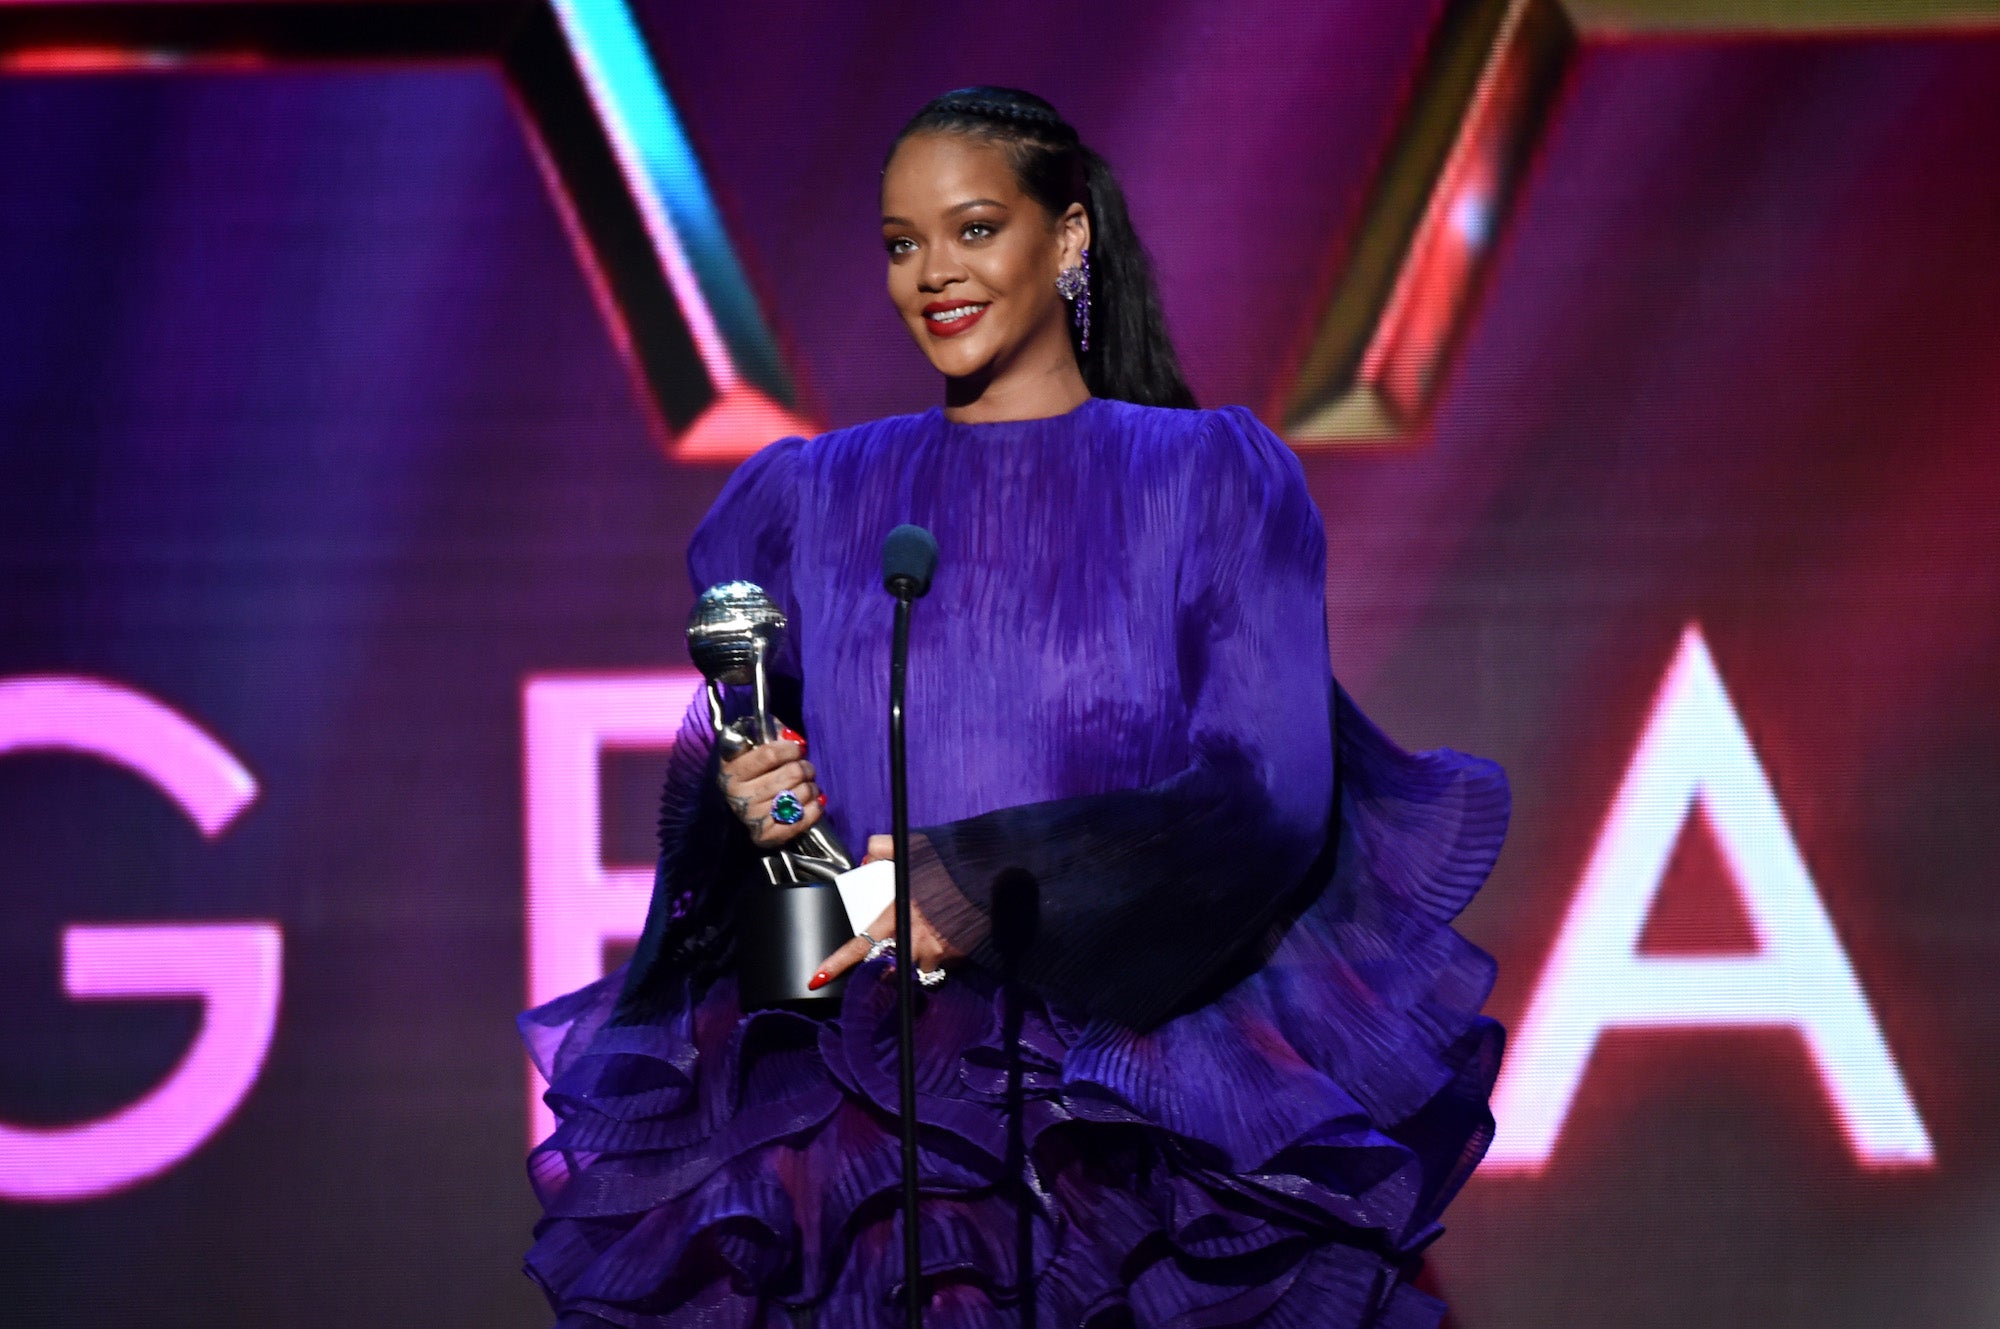 Rihanna Issues Call To Action During Inspiring NAACP Speech: 'We Can Only Fix This World Together'